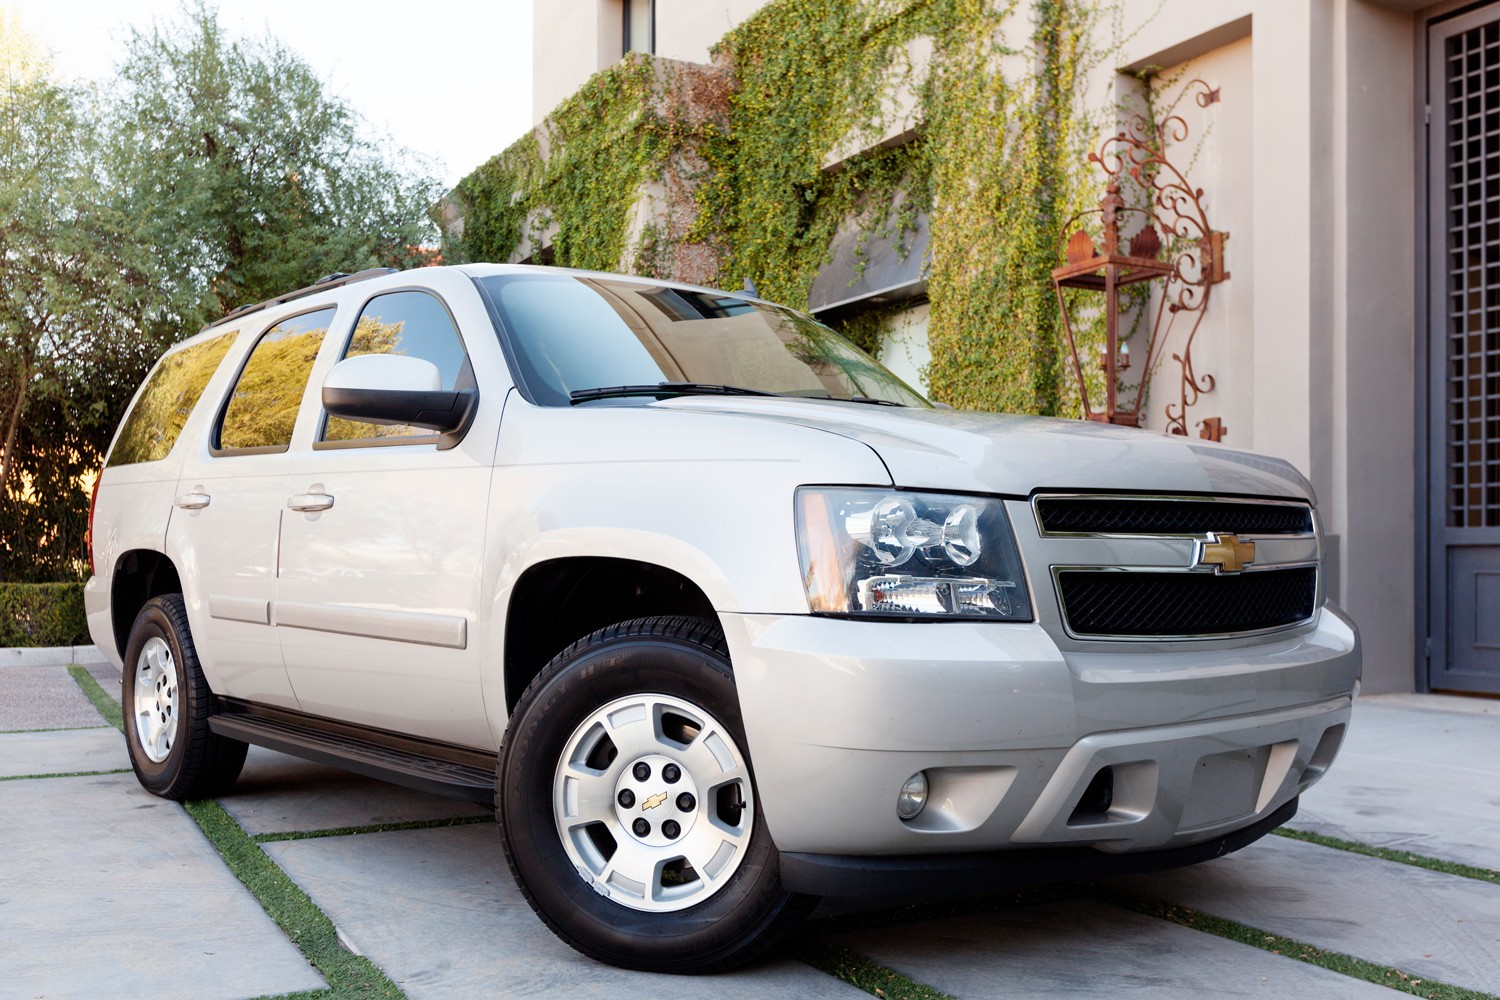 A photo of a silver Chevrolet Tahoe sport utility vehicle